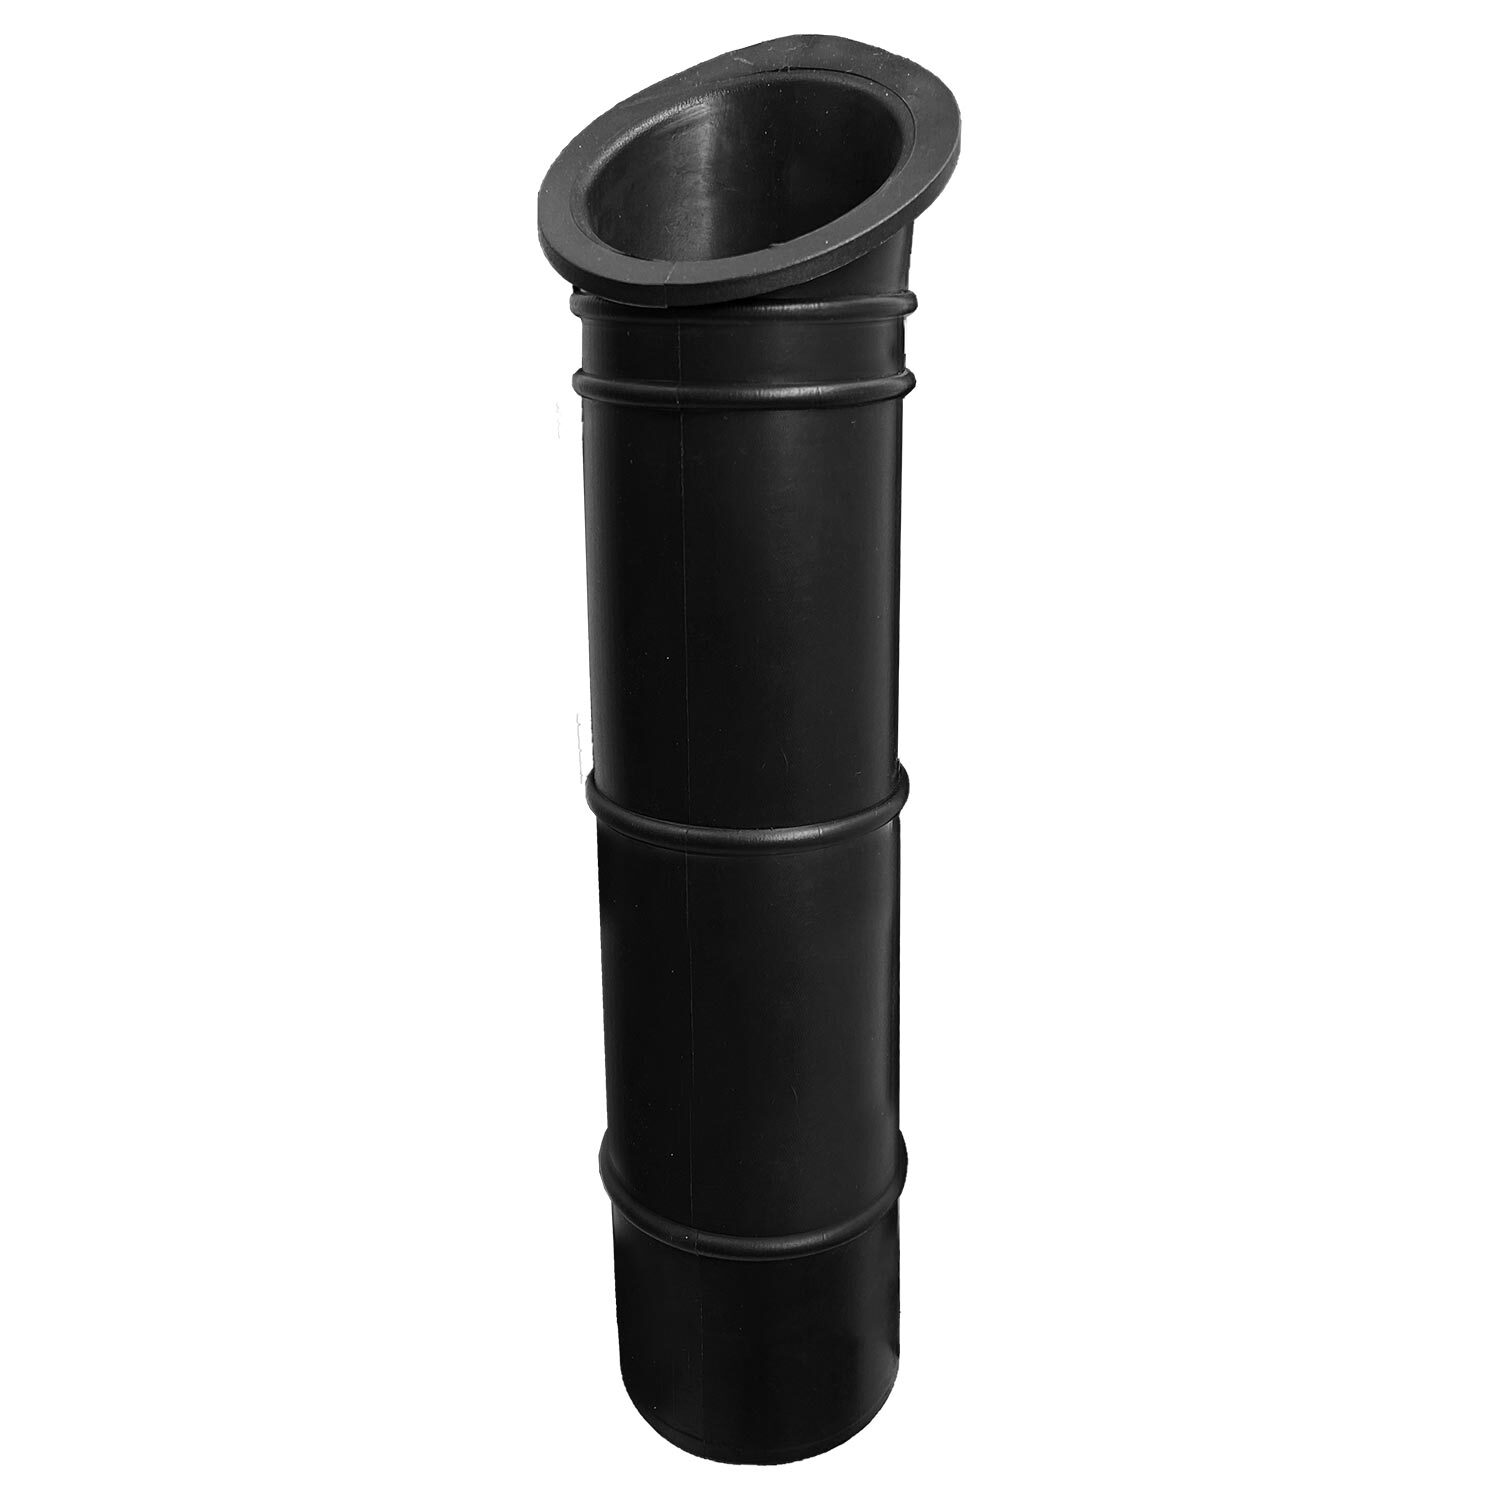 Fishing Rod Holder Insert Protector Pole Rack Insert Protector Replacement  Black